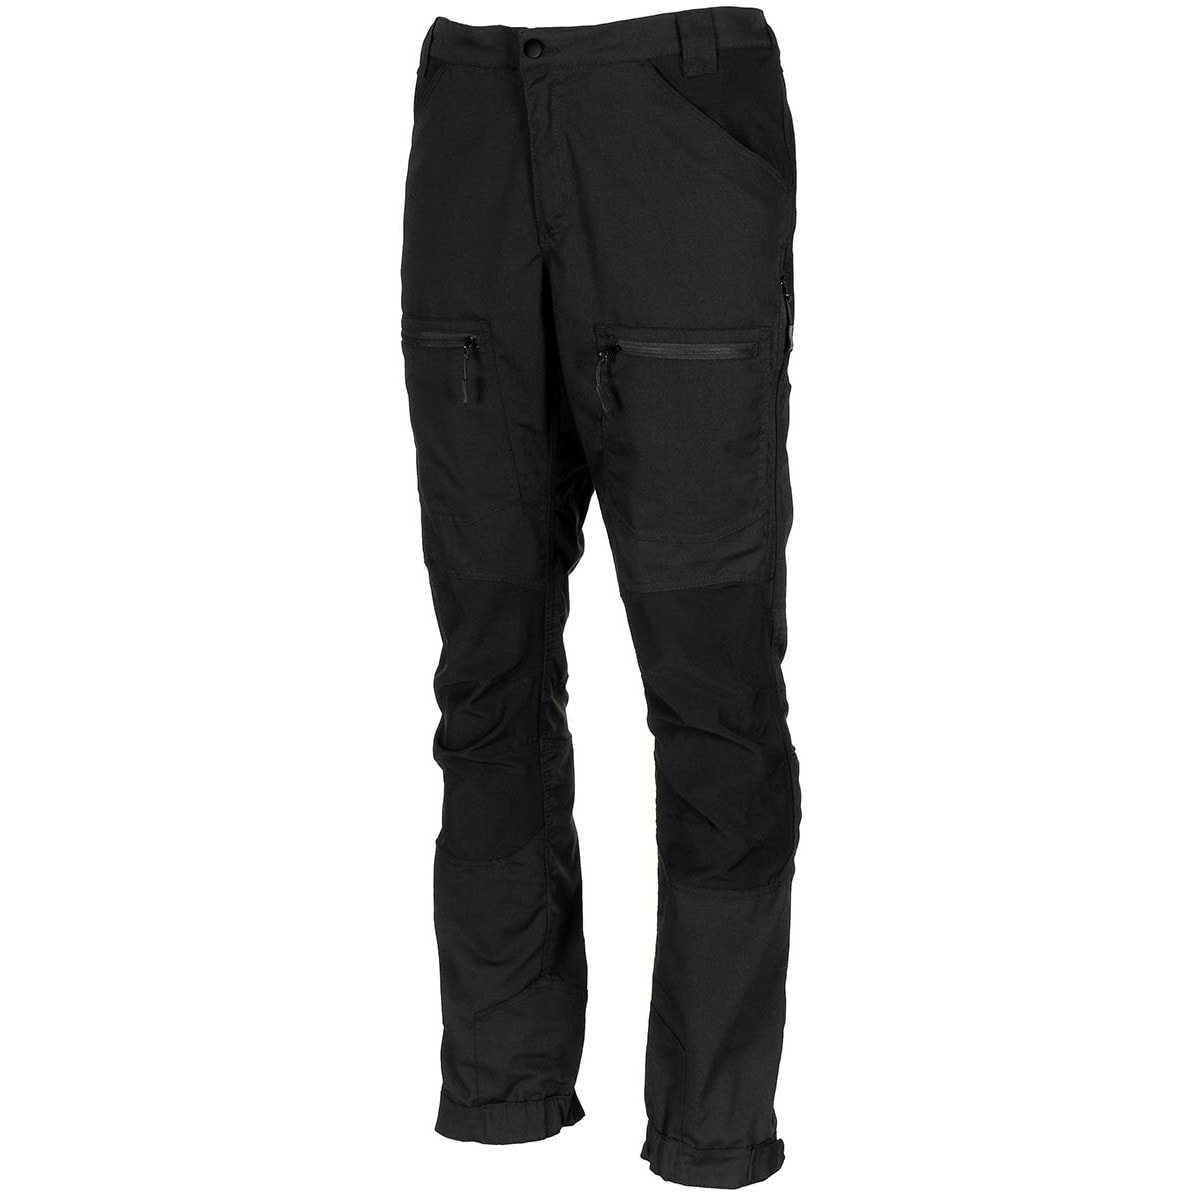 Dezsed Men's Outdoor Military Army Cargo Pants Clearance Men Casual Slim  Fit Zipper Wear-resistant Training Suit Camouflage Trousers Black XS -  Walmart.com